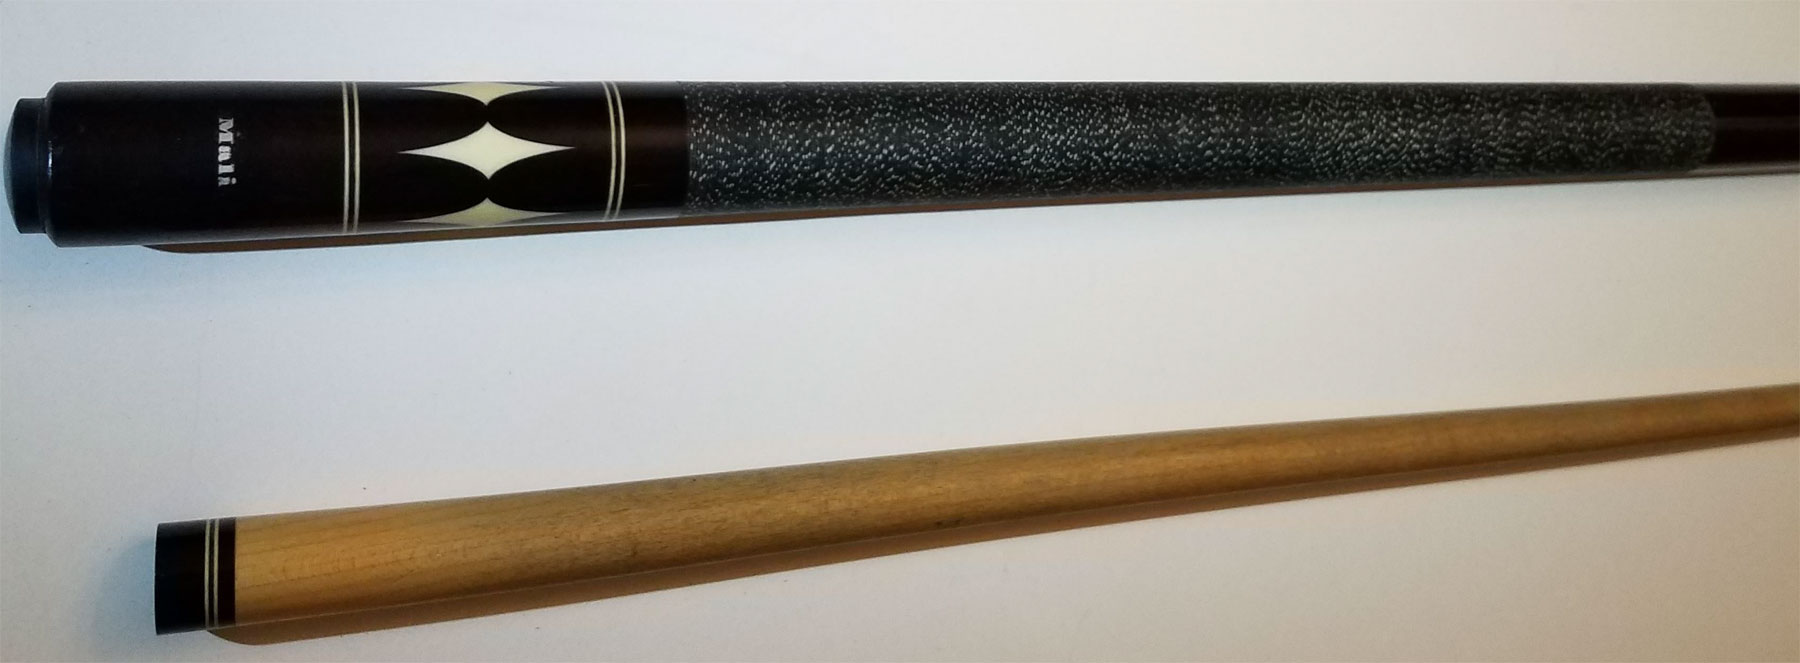 Mali Pool Cue Identification and Value